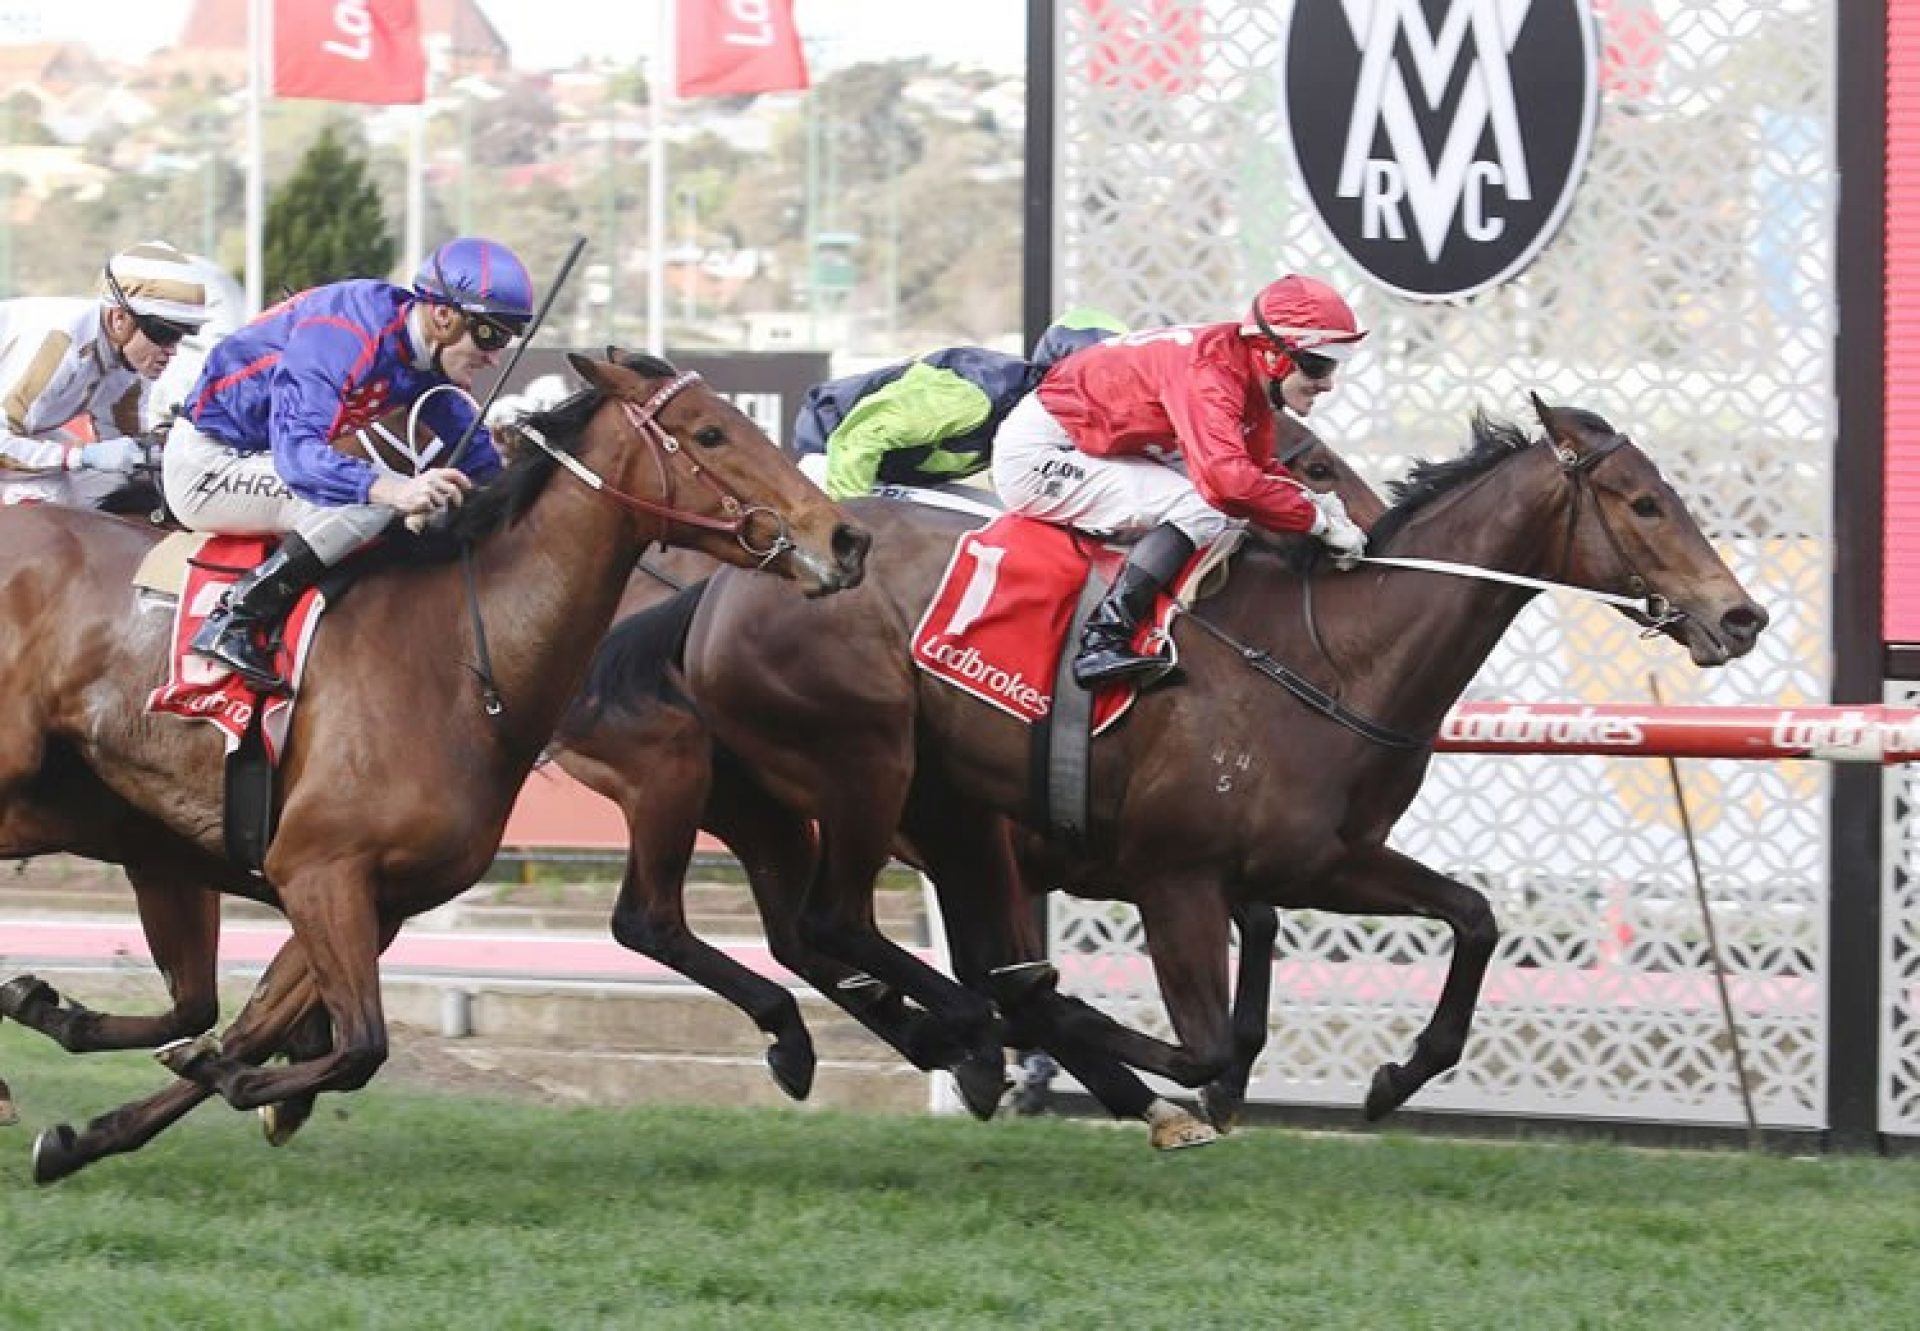 Thrillster (Starspangledbanner) winning the Listed MVRC Atlantic Jewel Stakes at Moonee Valley